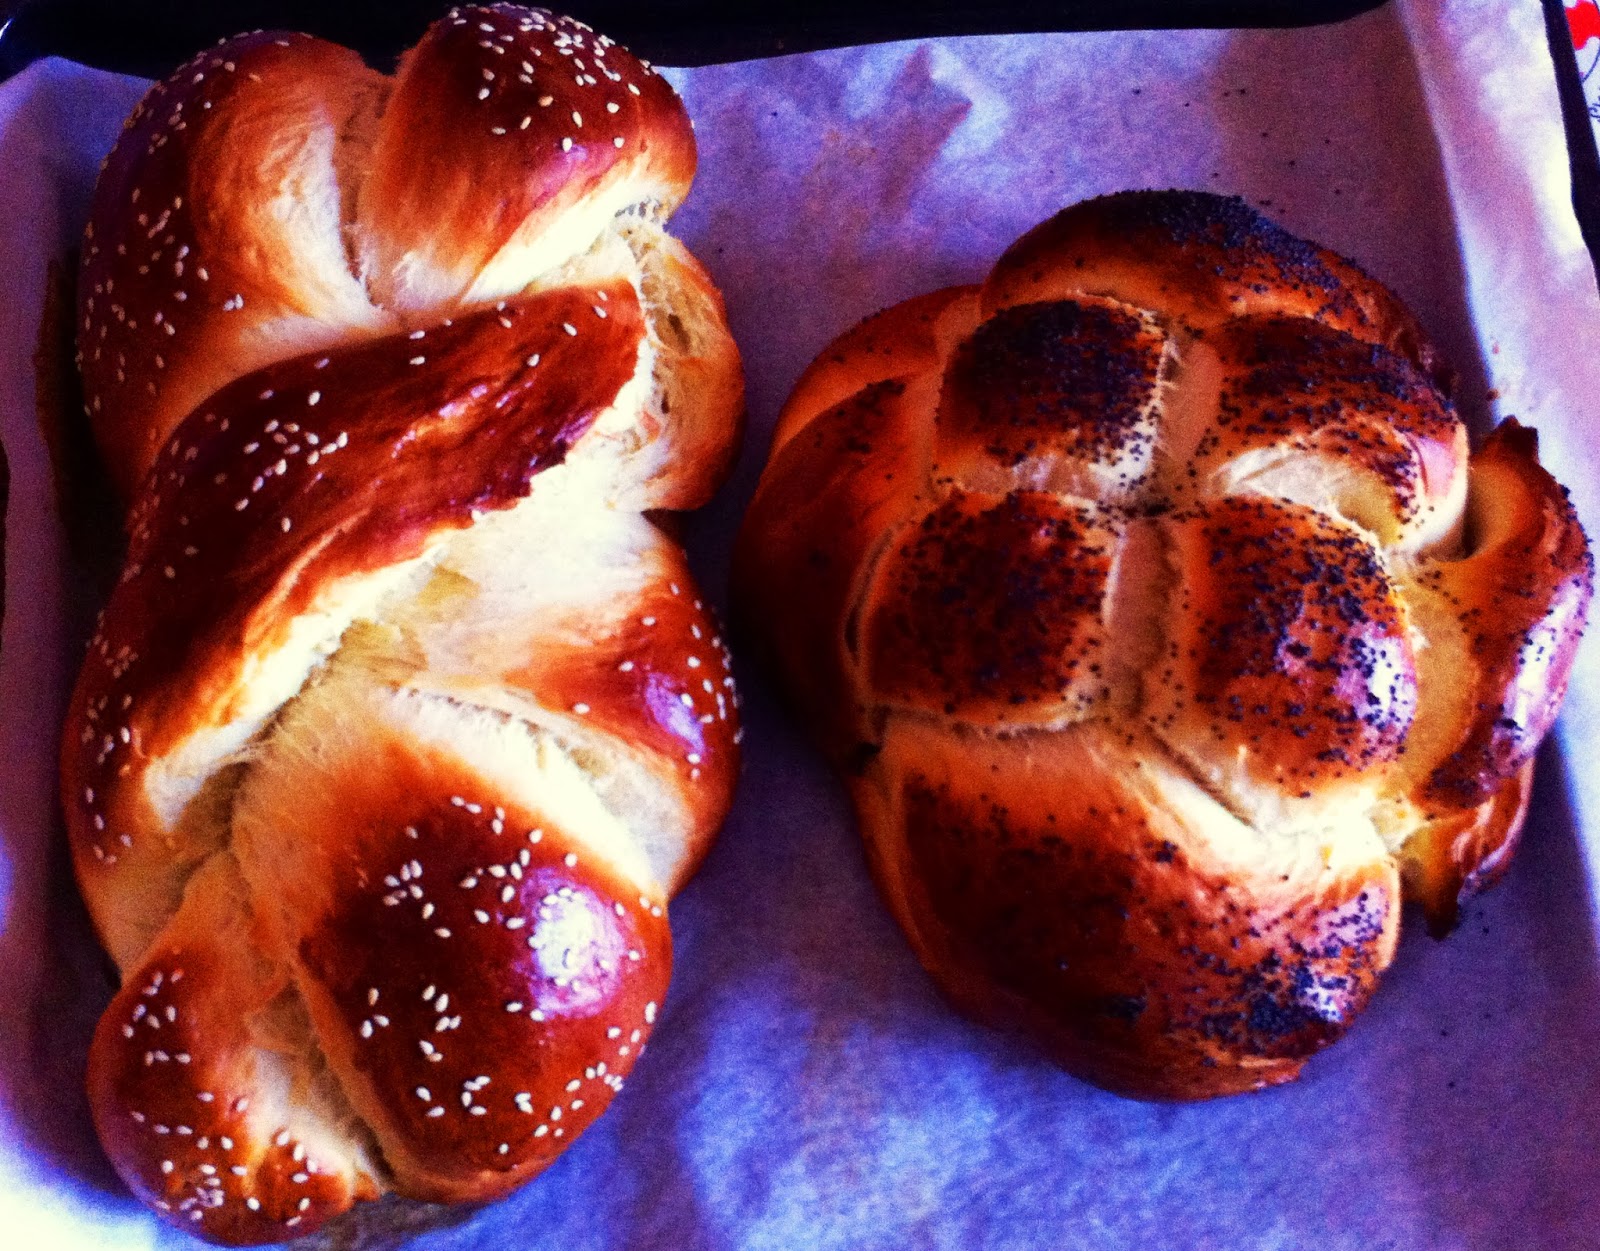 Young &amp; Foodish: Ethnic Recipe: Challah / Ricette Etniche: Challah